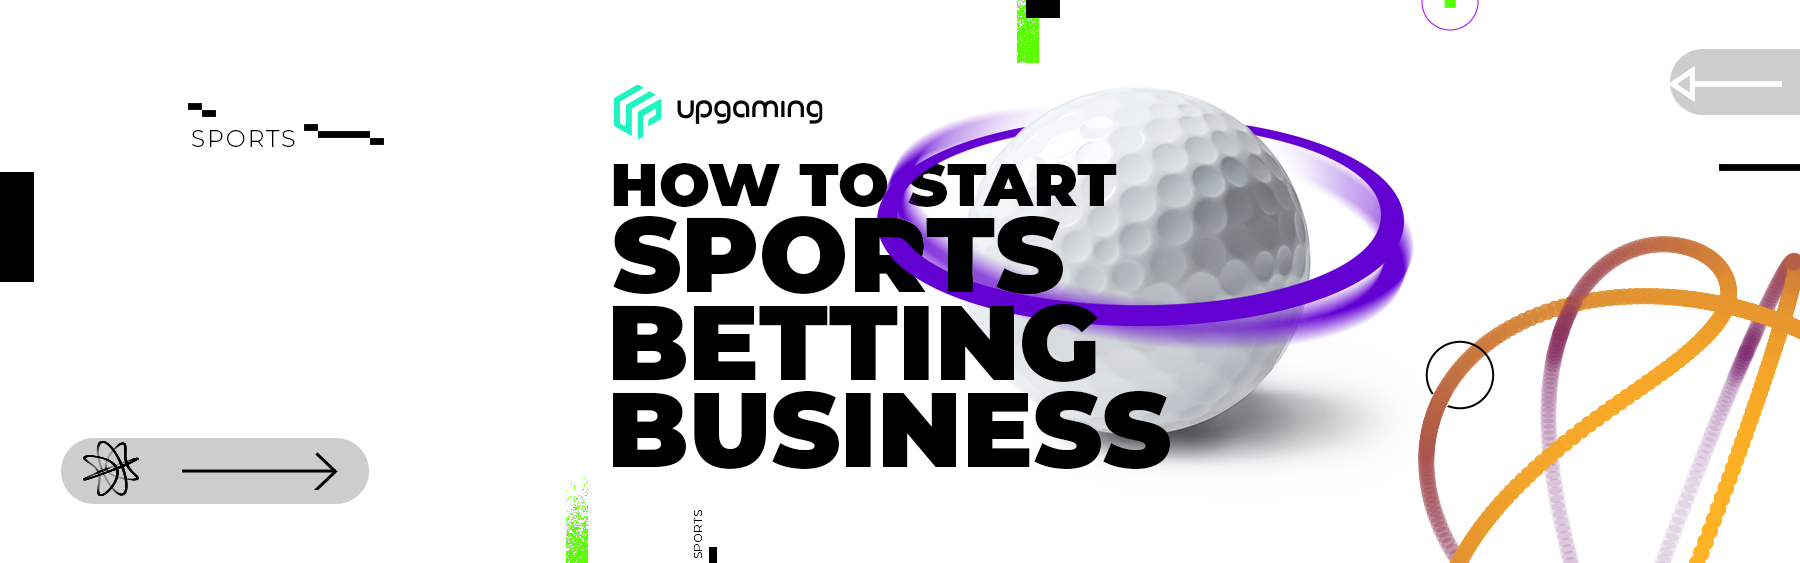 how to start sports betting business